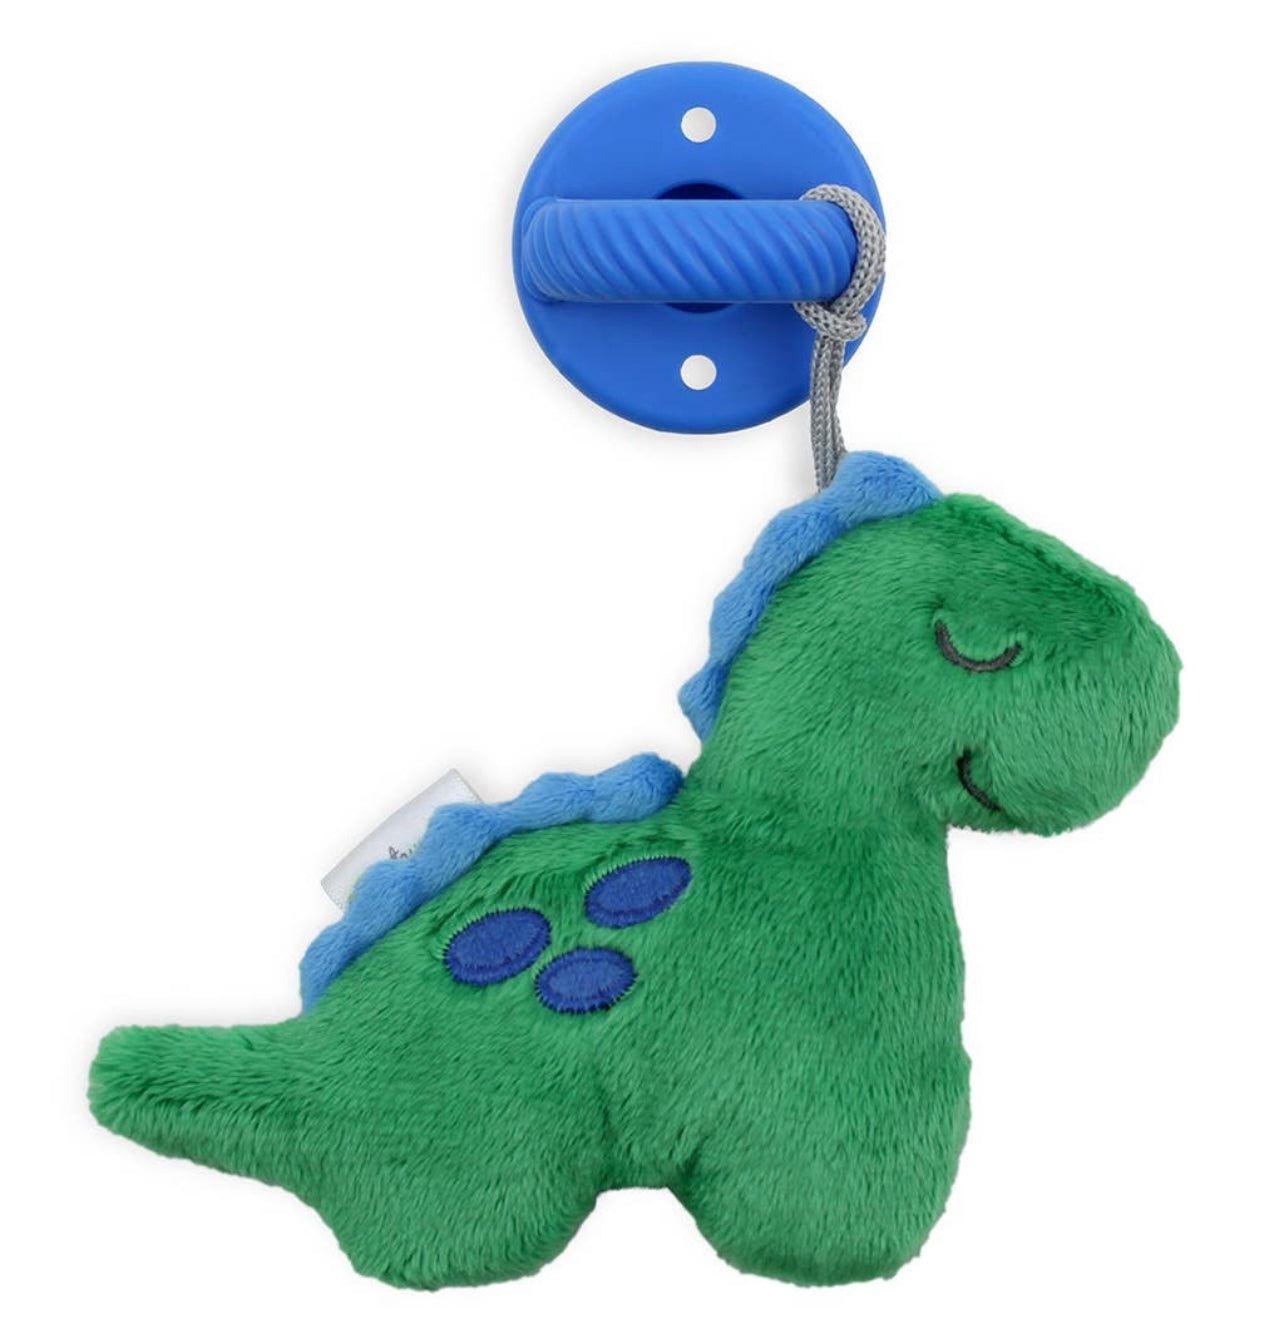 Sweetie Pal Plush and Pacifier